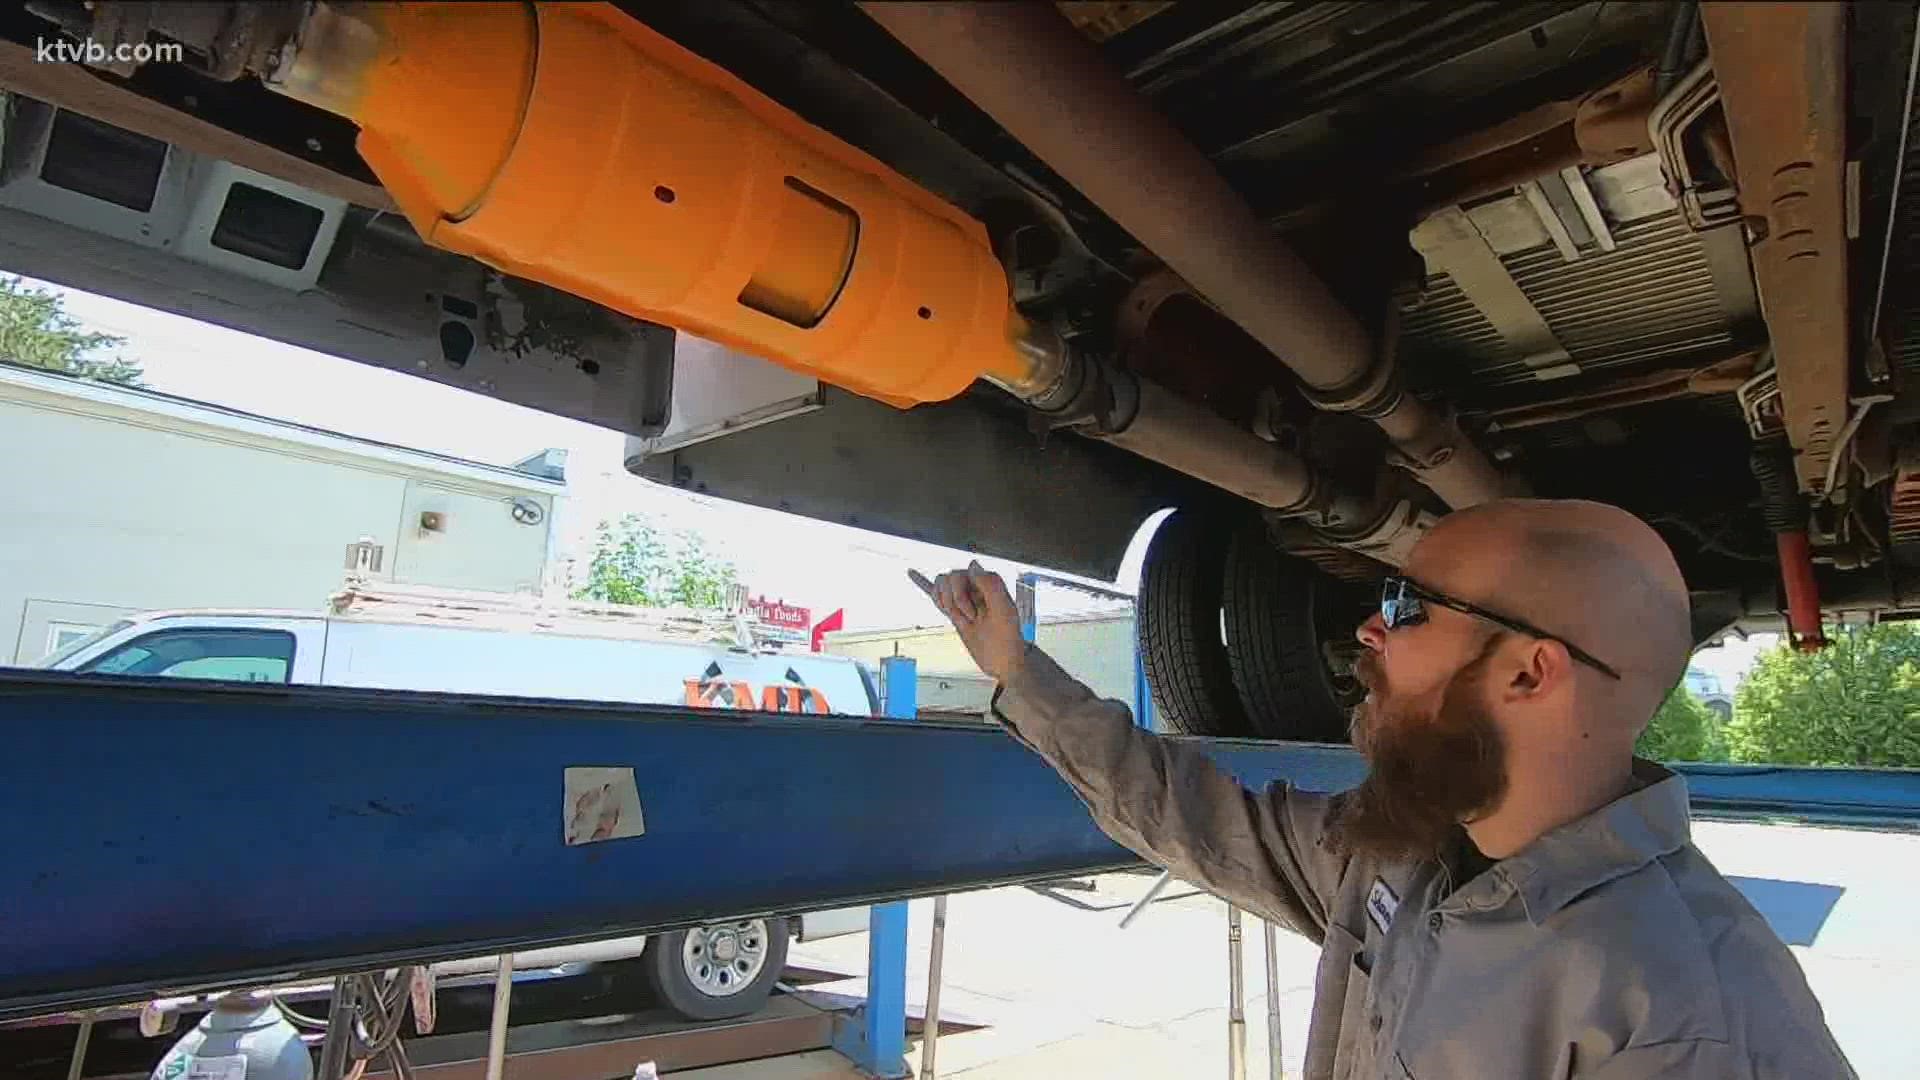 Boise Muffler Shop on Fairview Avenue helps catalytic converter theft victims every day. They're taking extra measures to prevent future thefts.